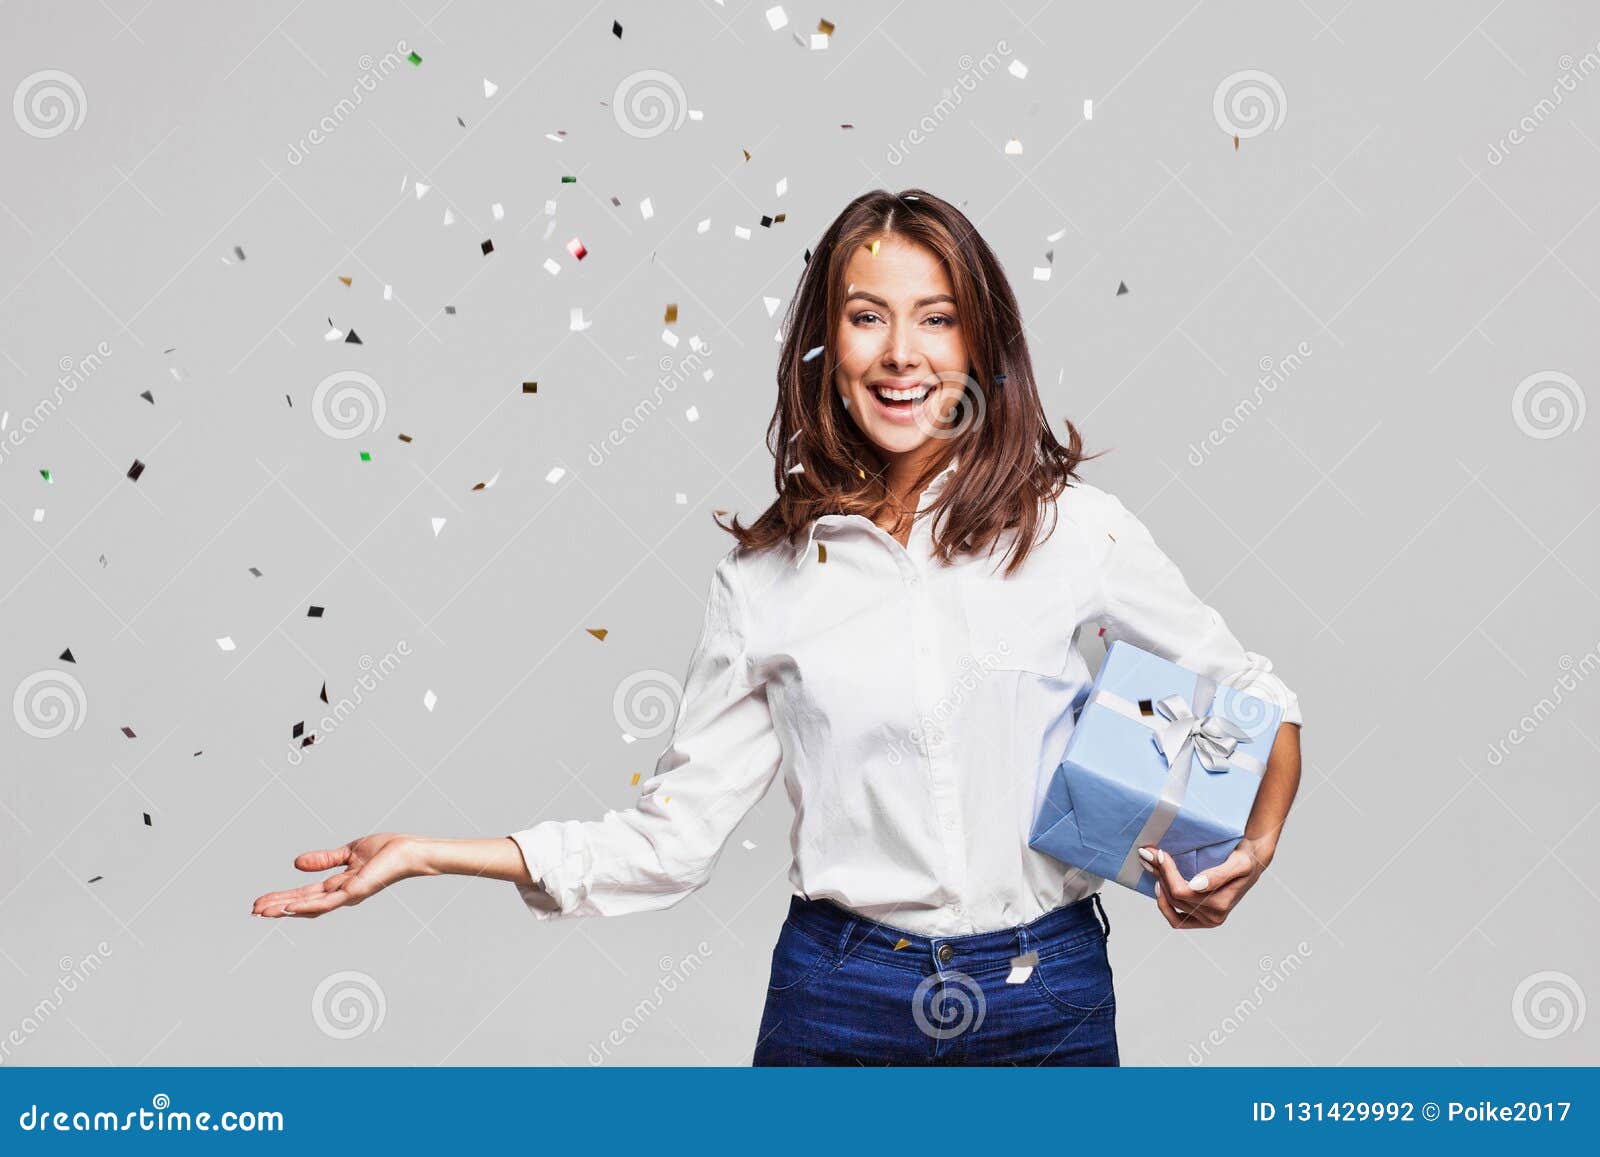 beautiful happy woman with gift box at celebration party with confetti falling everywhere on her.